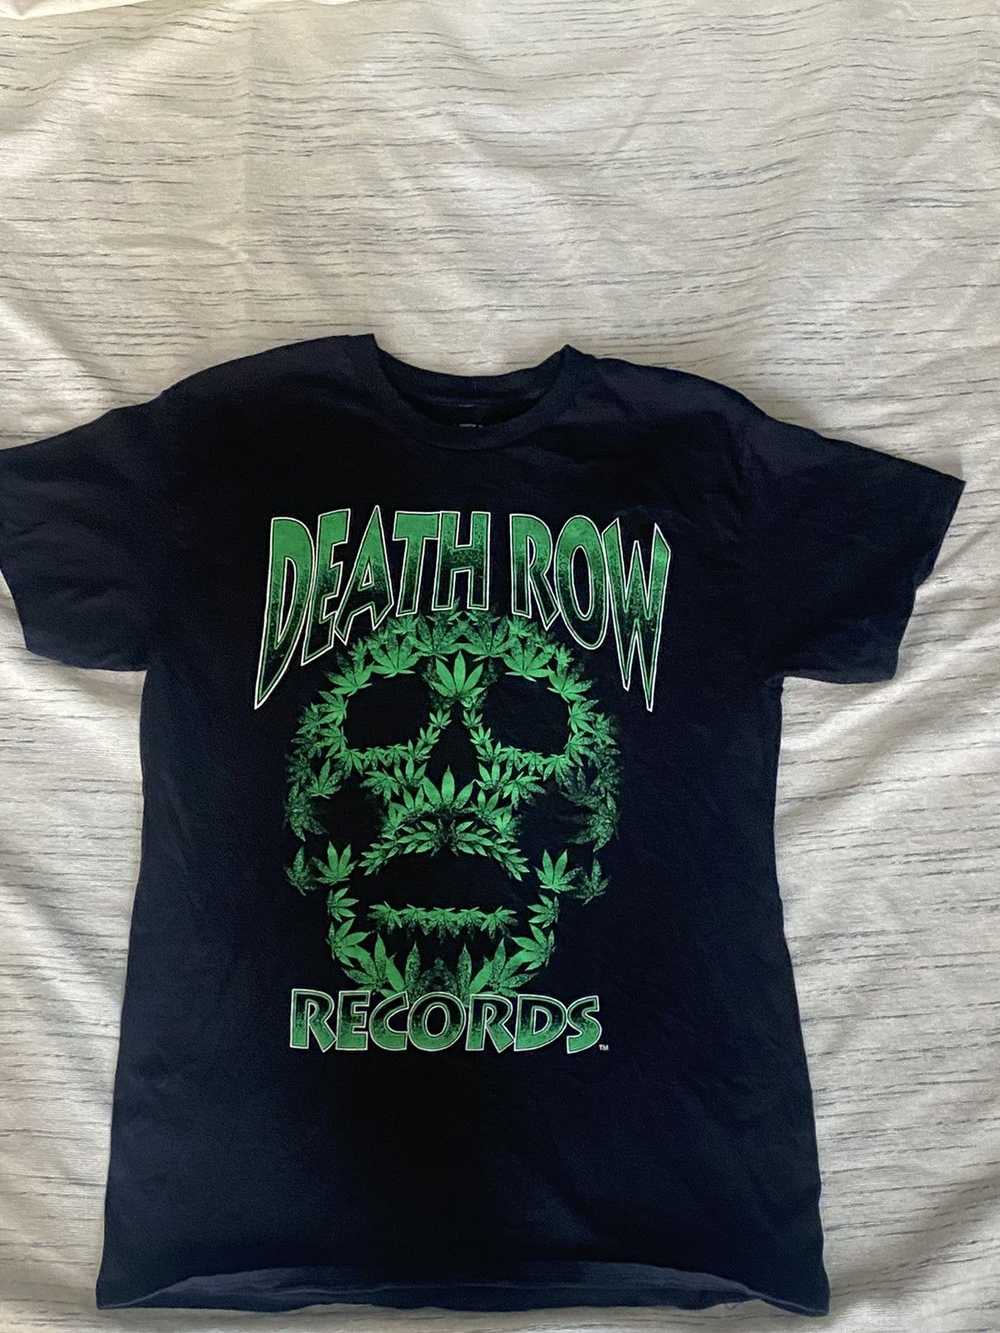 Other Death Row Chronic t shirt - image 1